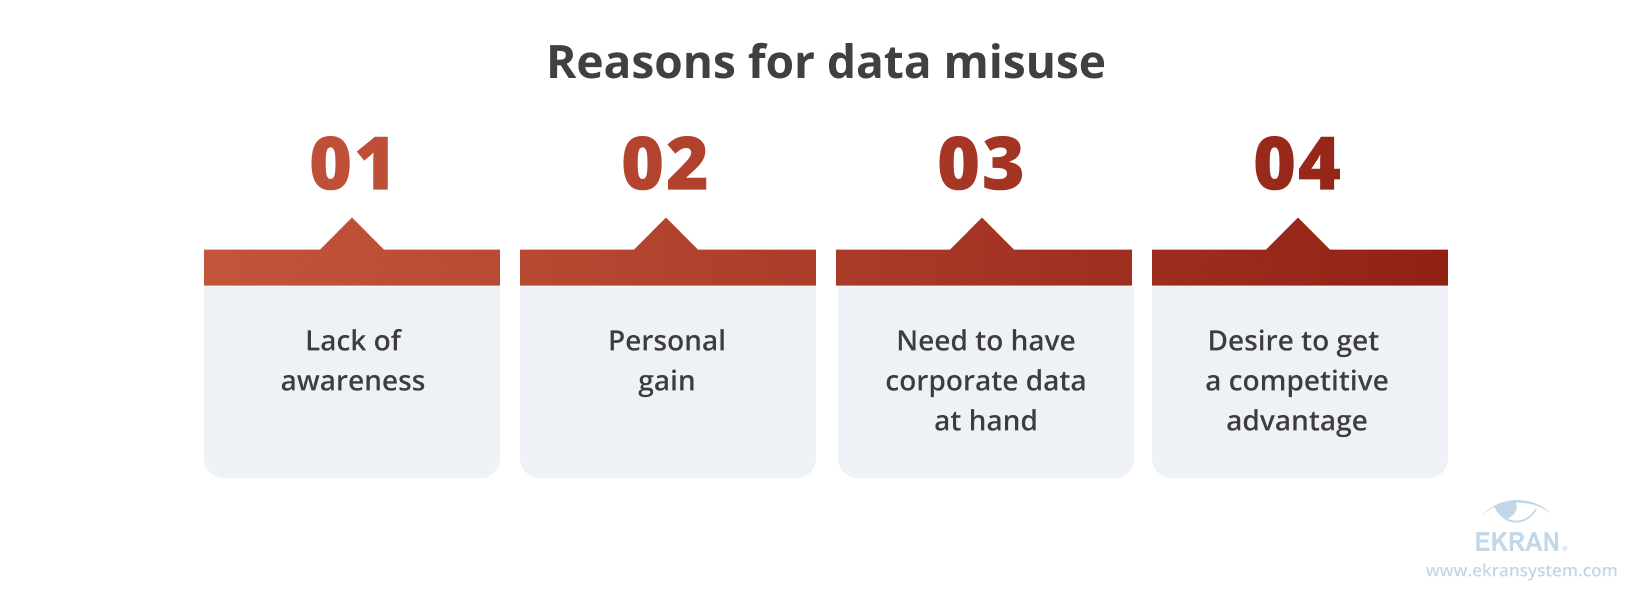 Reasons for data misuse